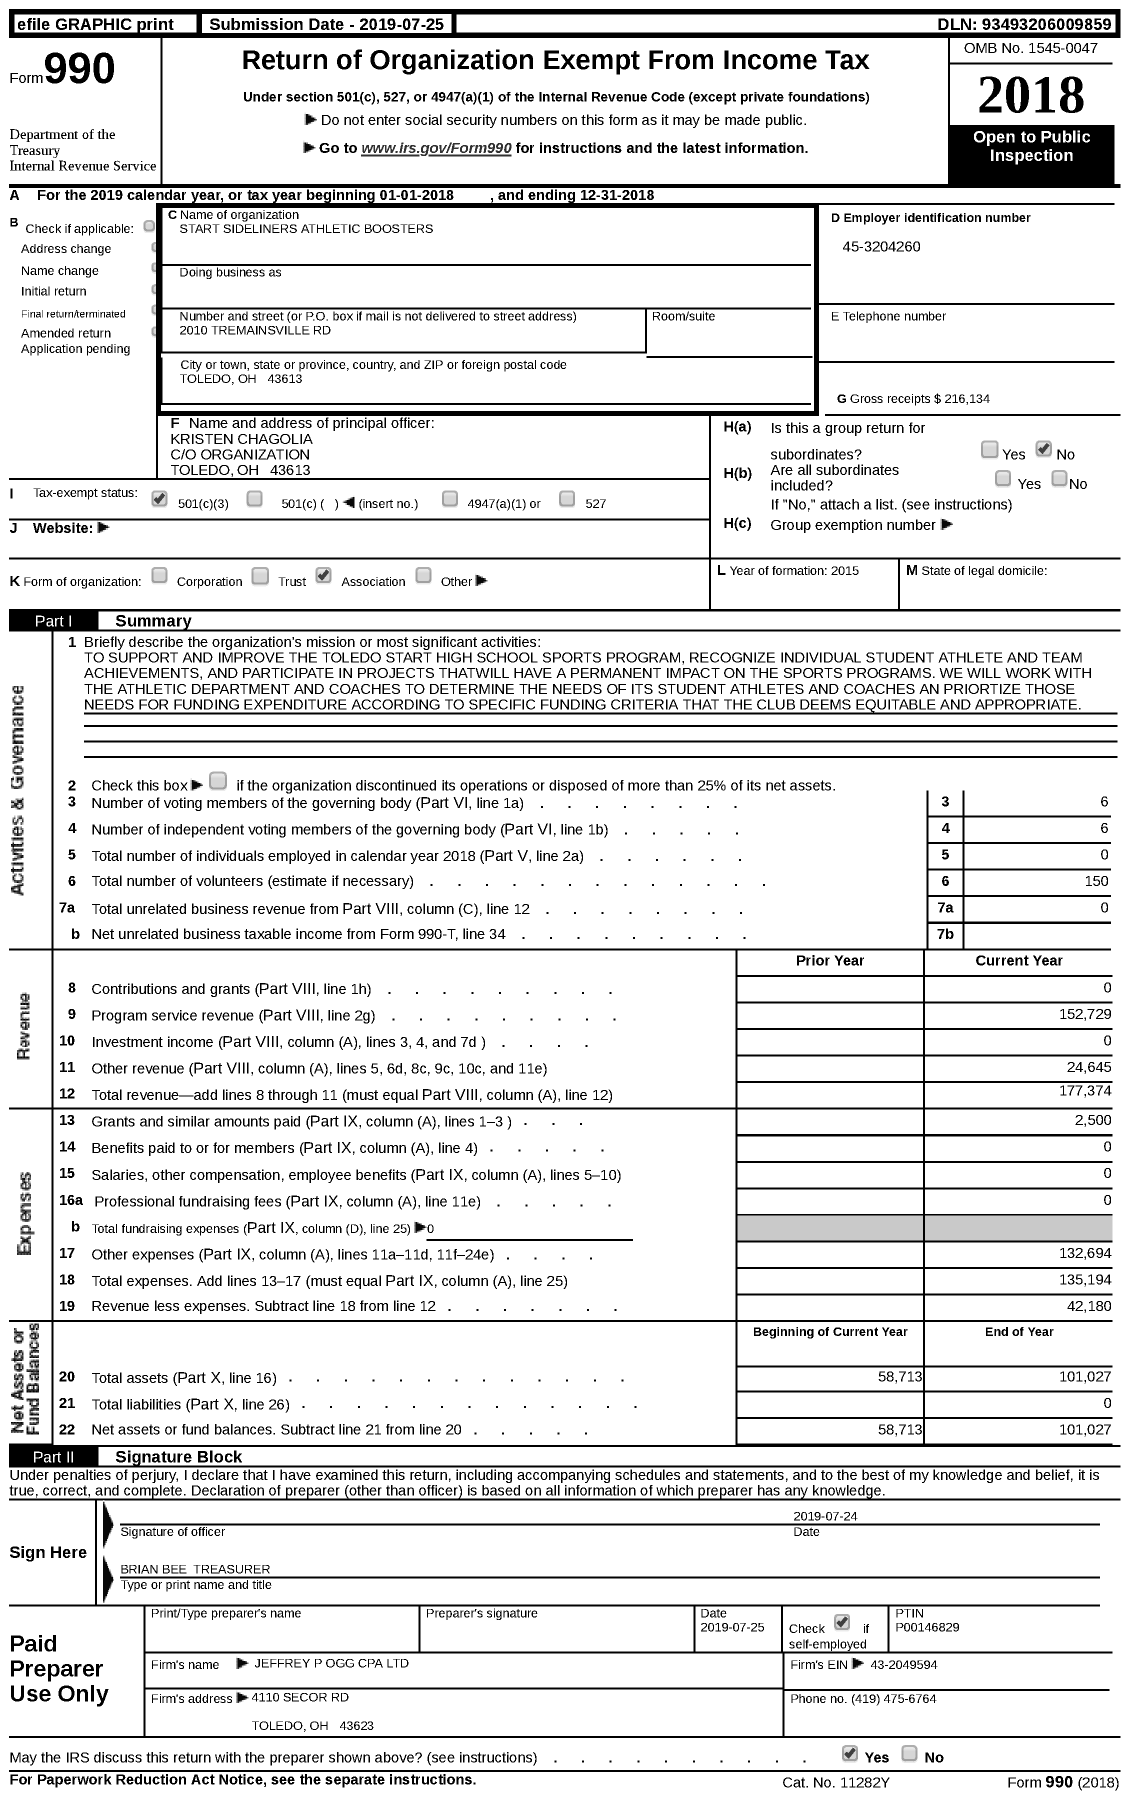 Image of first page of 2018 Form 990 for Start Sideliners Athletic Boosters